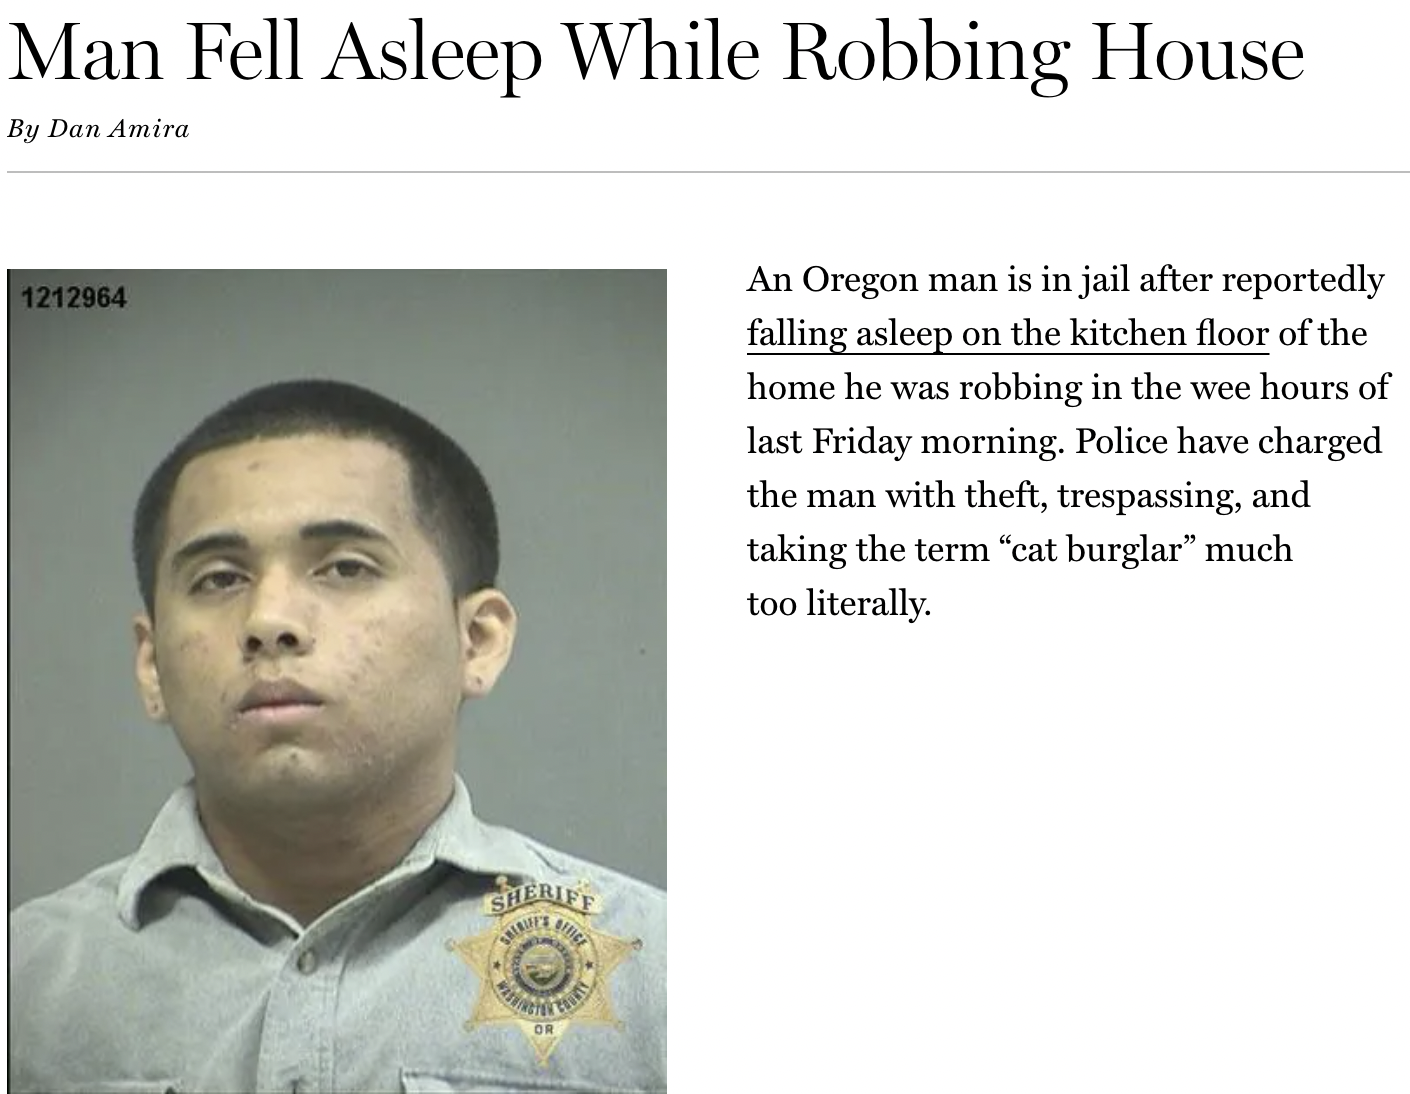 non-commissioned officer - Man Fell Asleep While Robbing House By Dan Amira 1212964 Sherify Cor An Oregon man is in jail after reportedly falling asleep on the kitchen floor of the home he was robbing in the wee hours of last Friday morning. Police have c